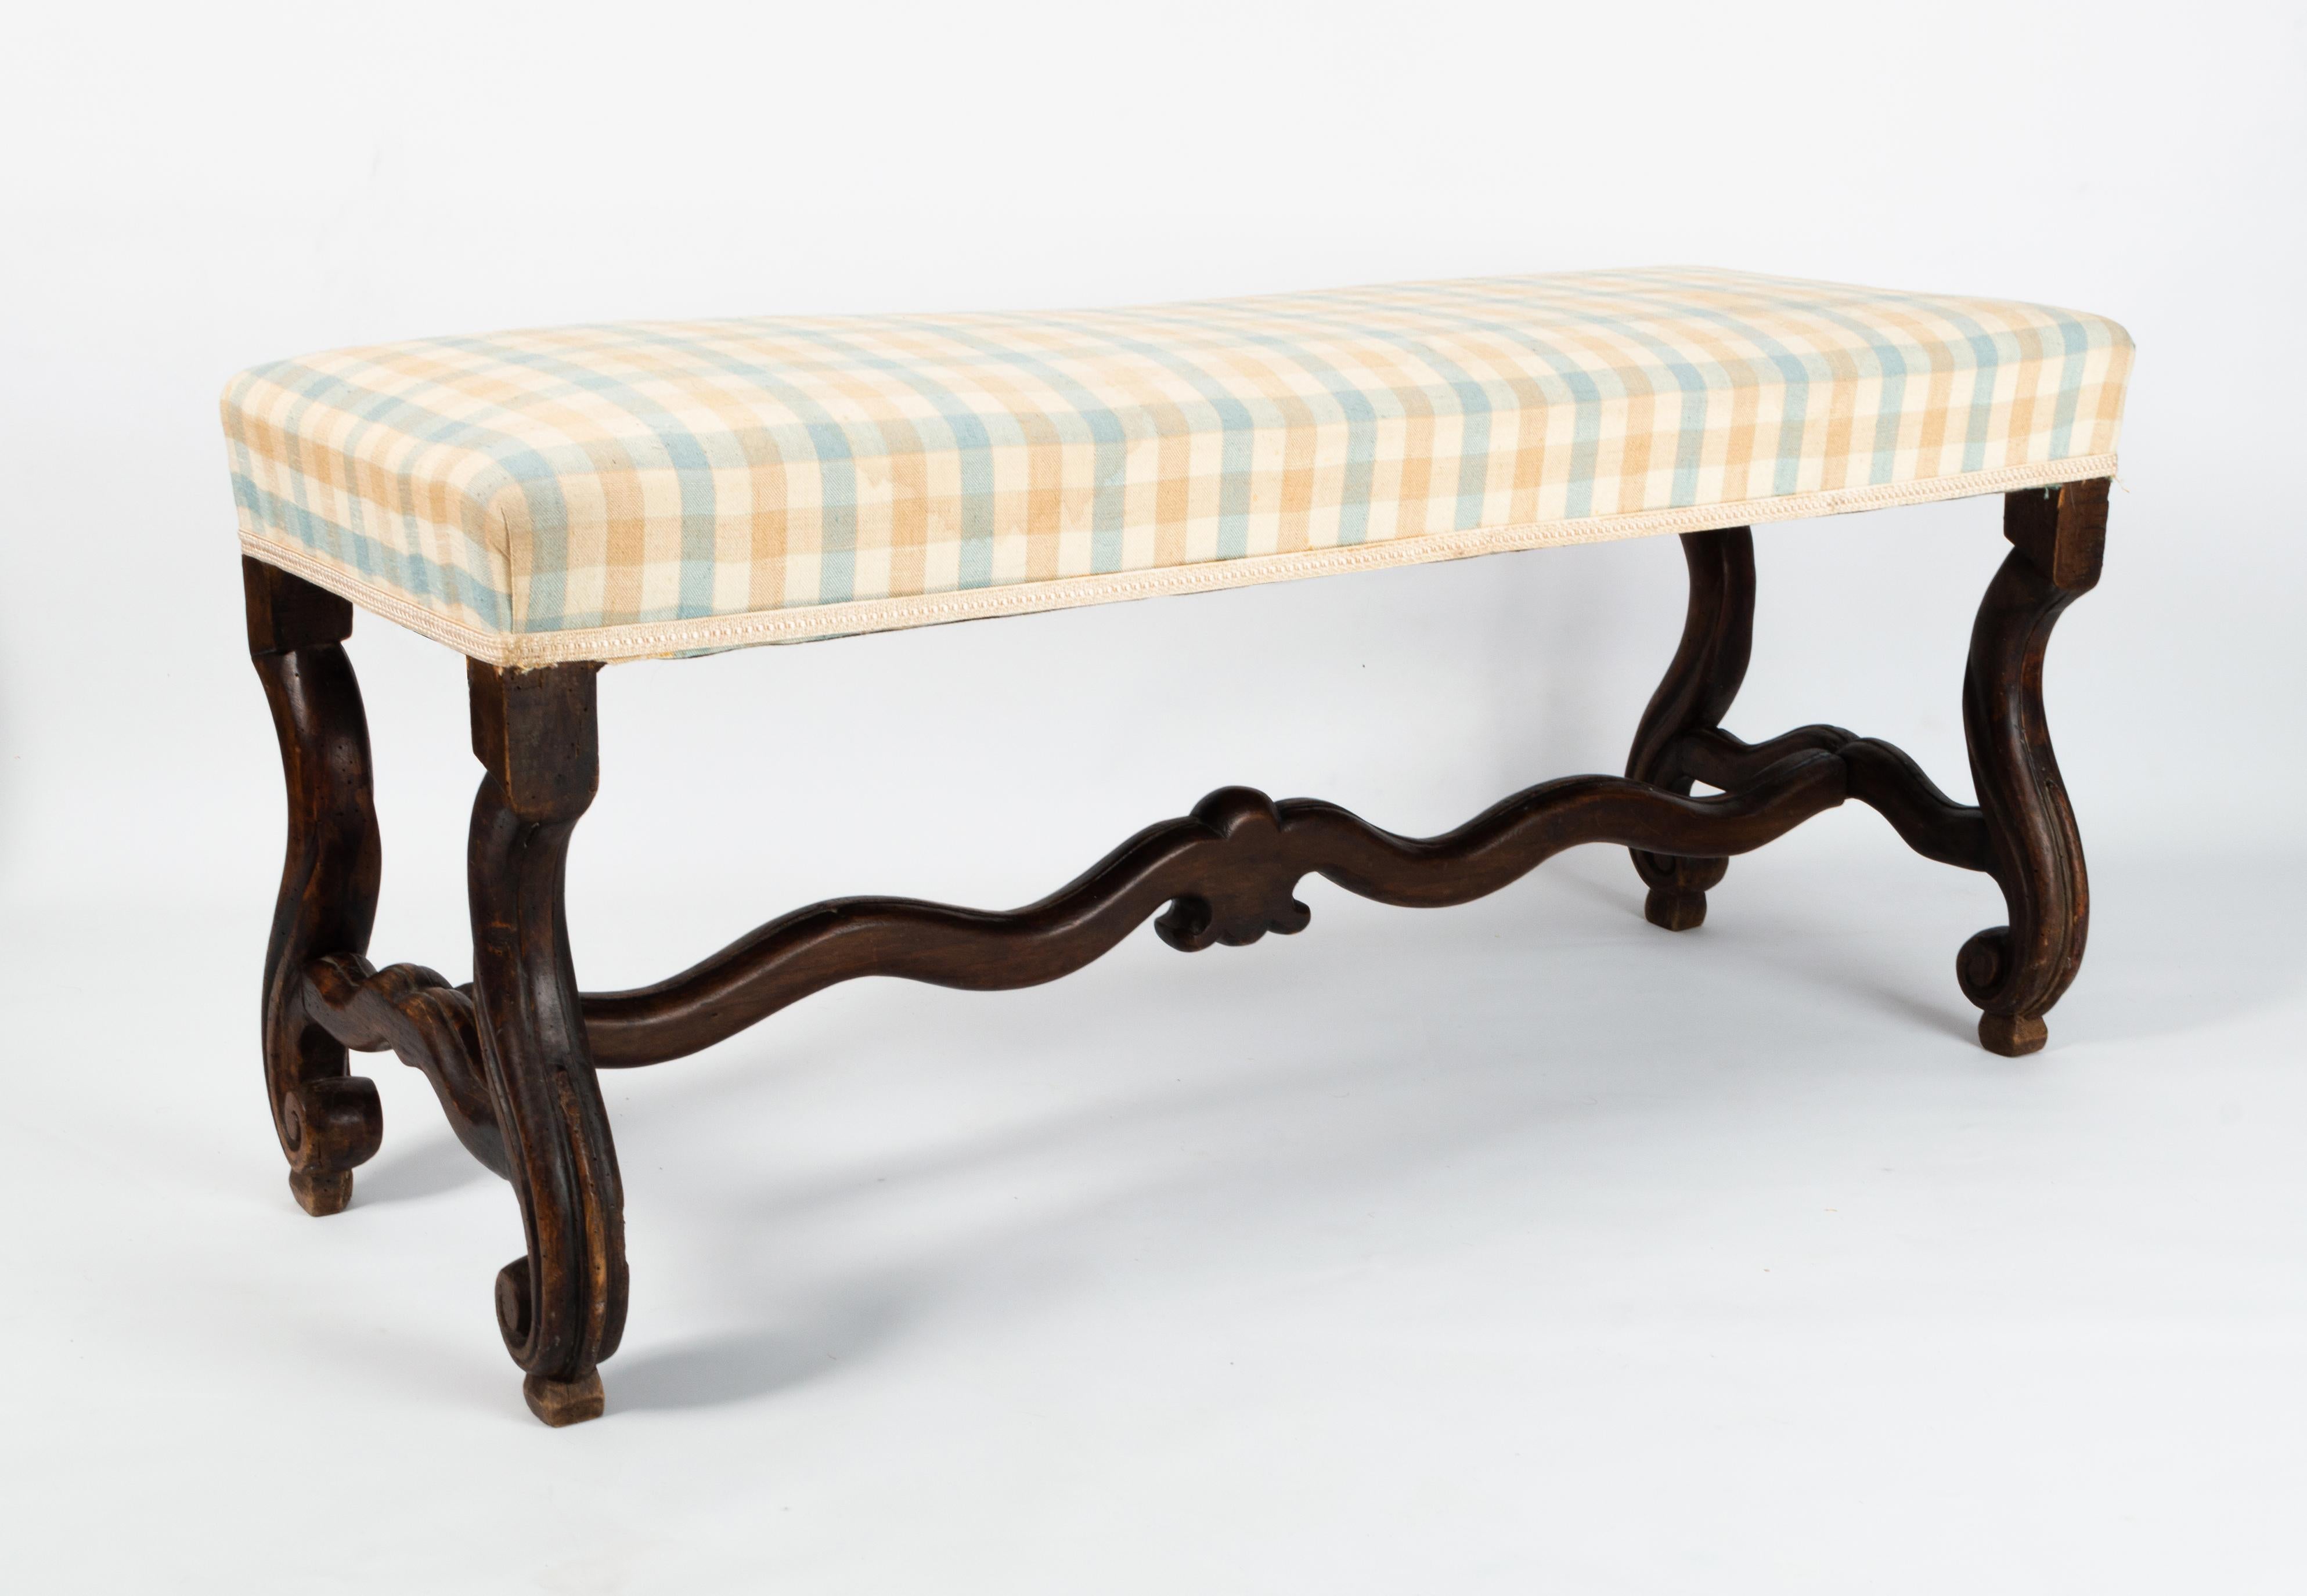 Antique French 19th Century Bench Long Ottoman Stool C.1820 In Good Condition For Sale In London, GB